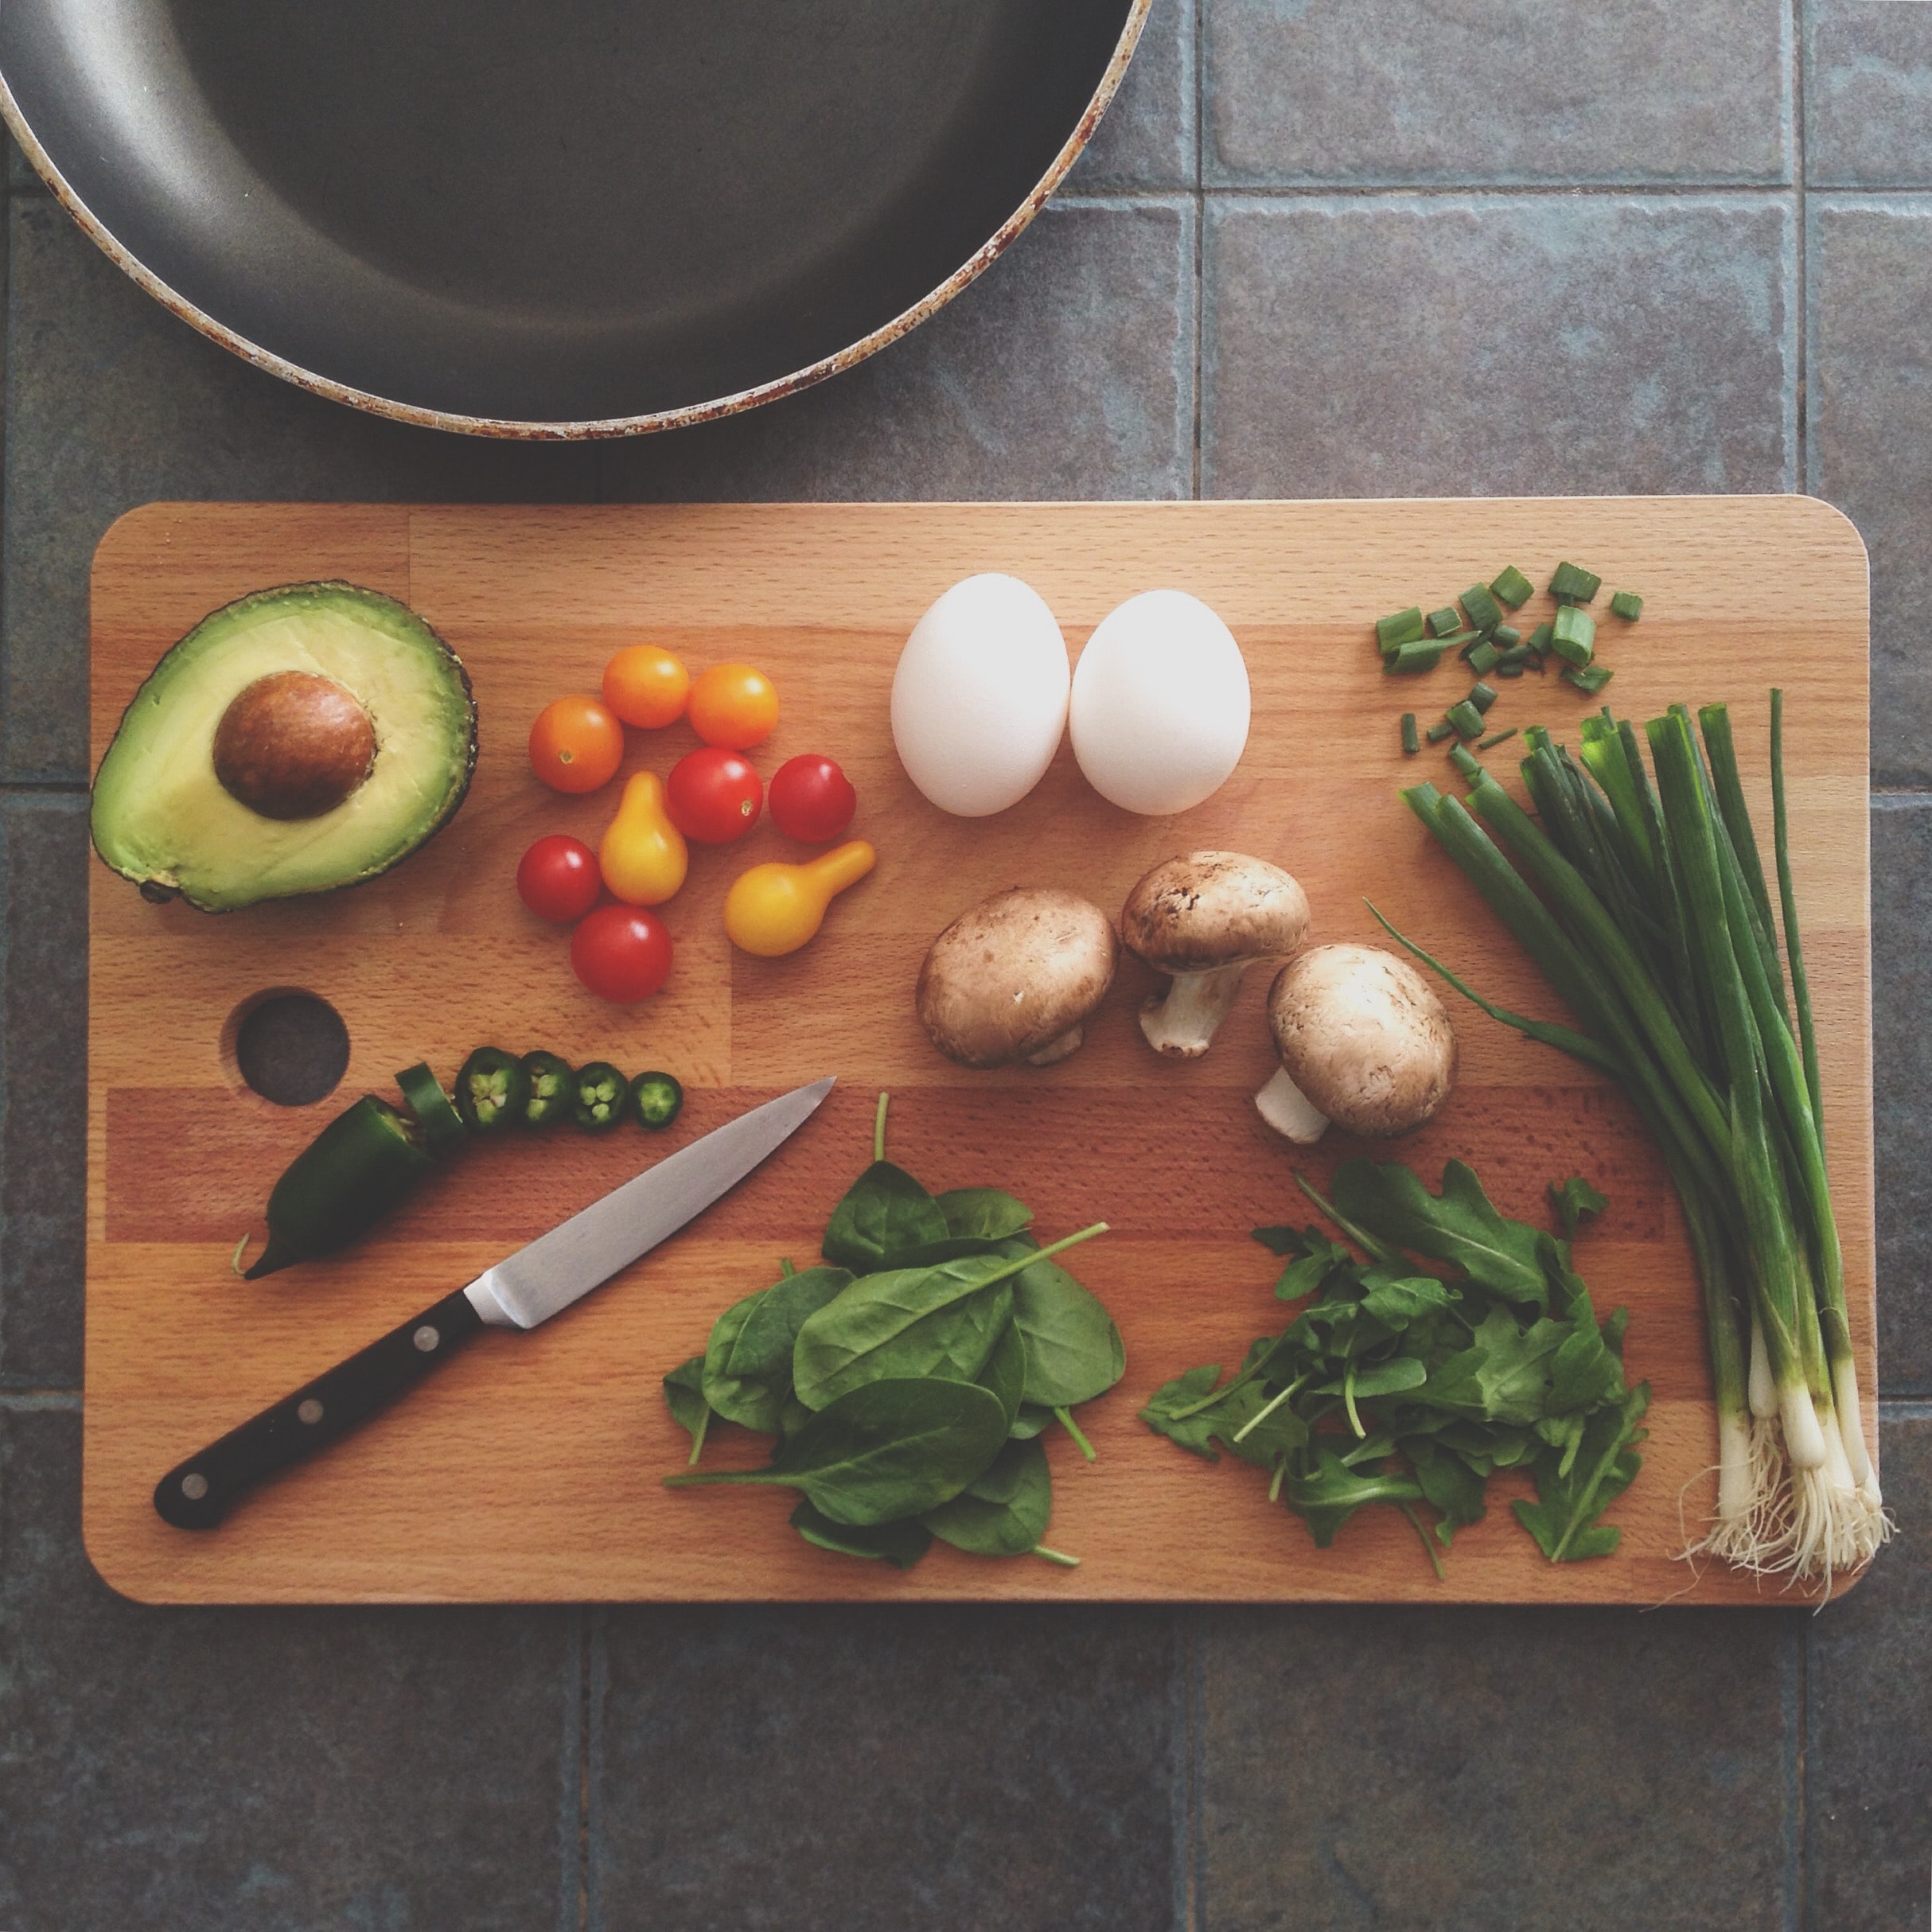 Various nutritious vegetables sit on a wood cutting board